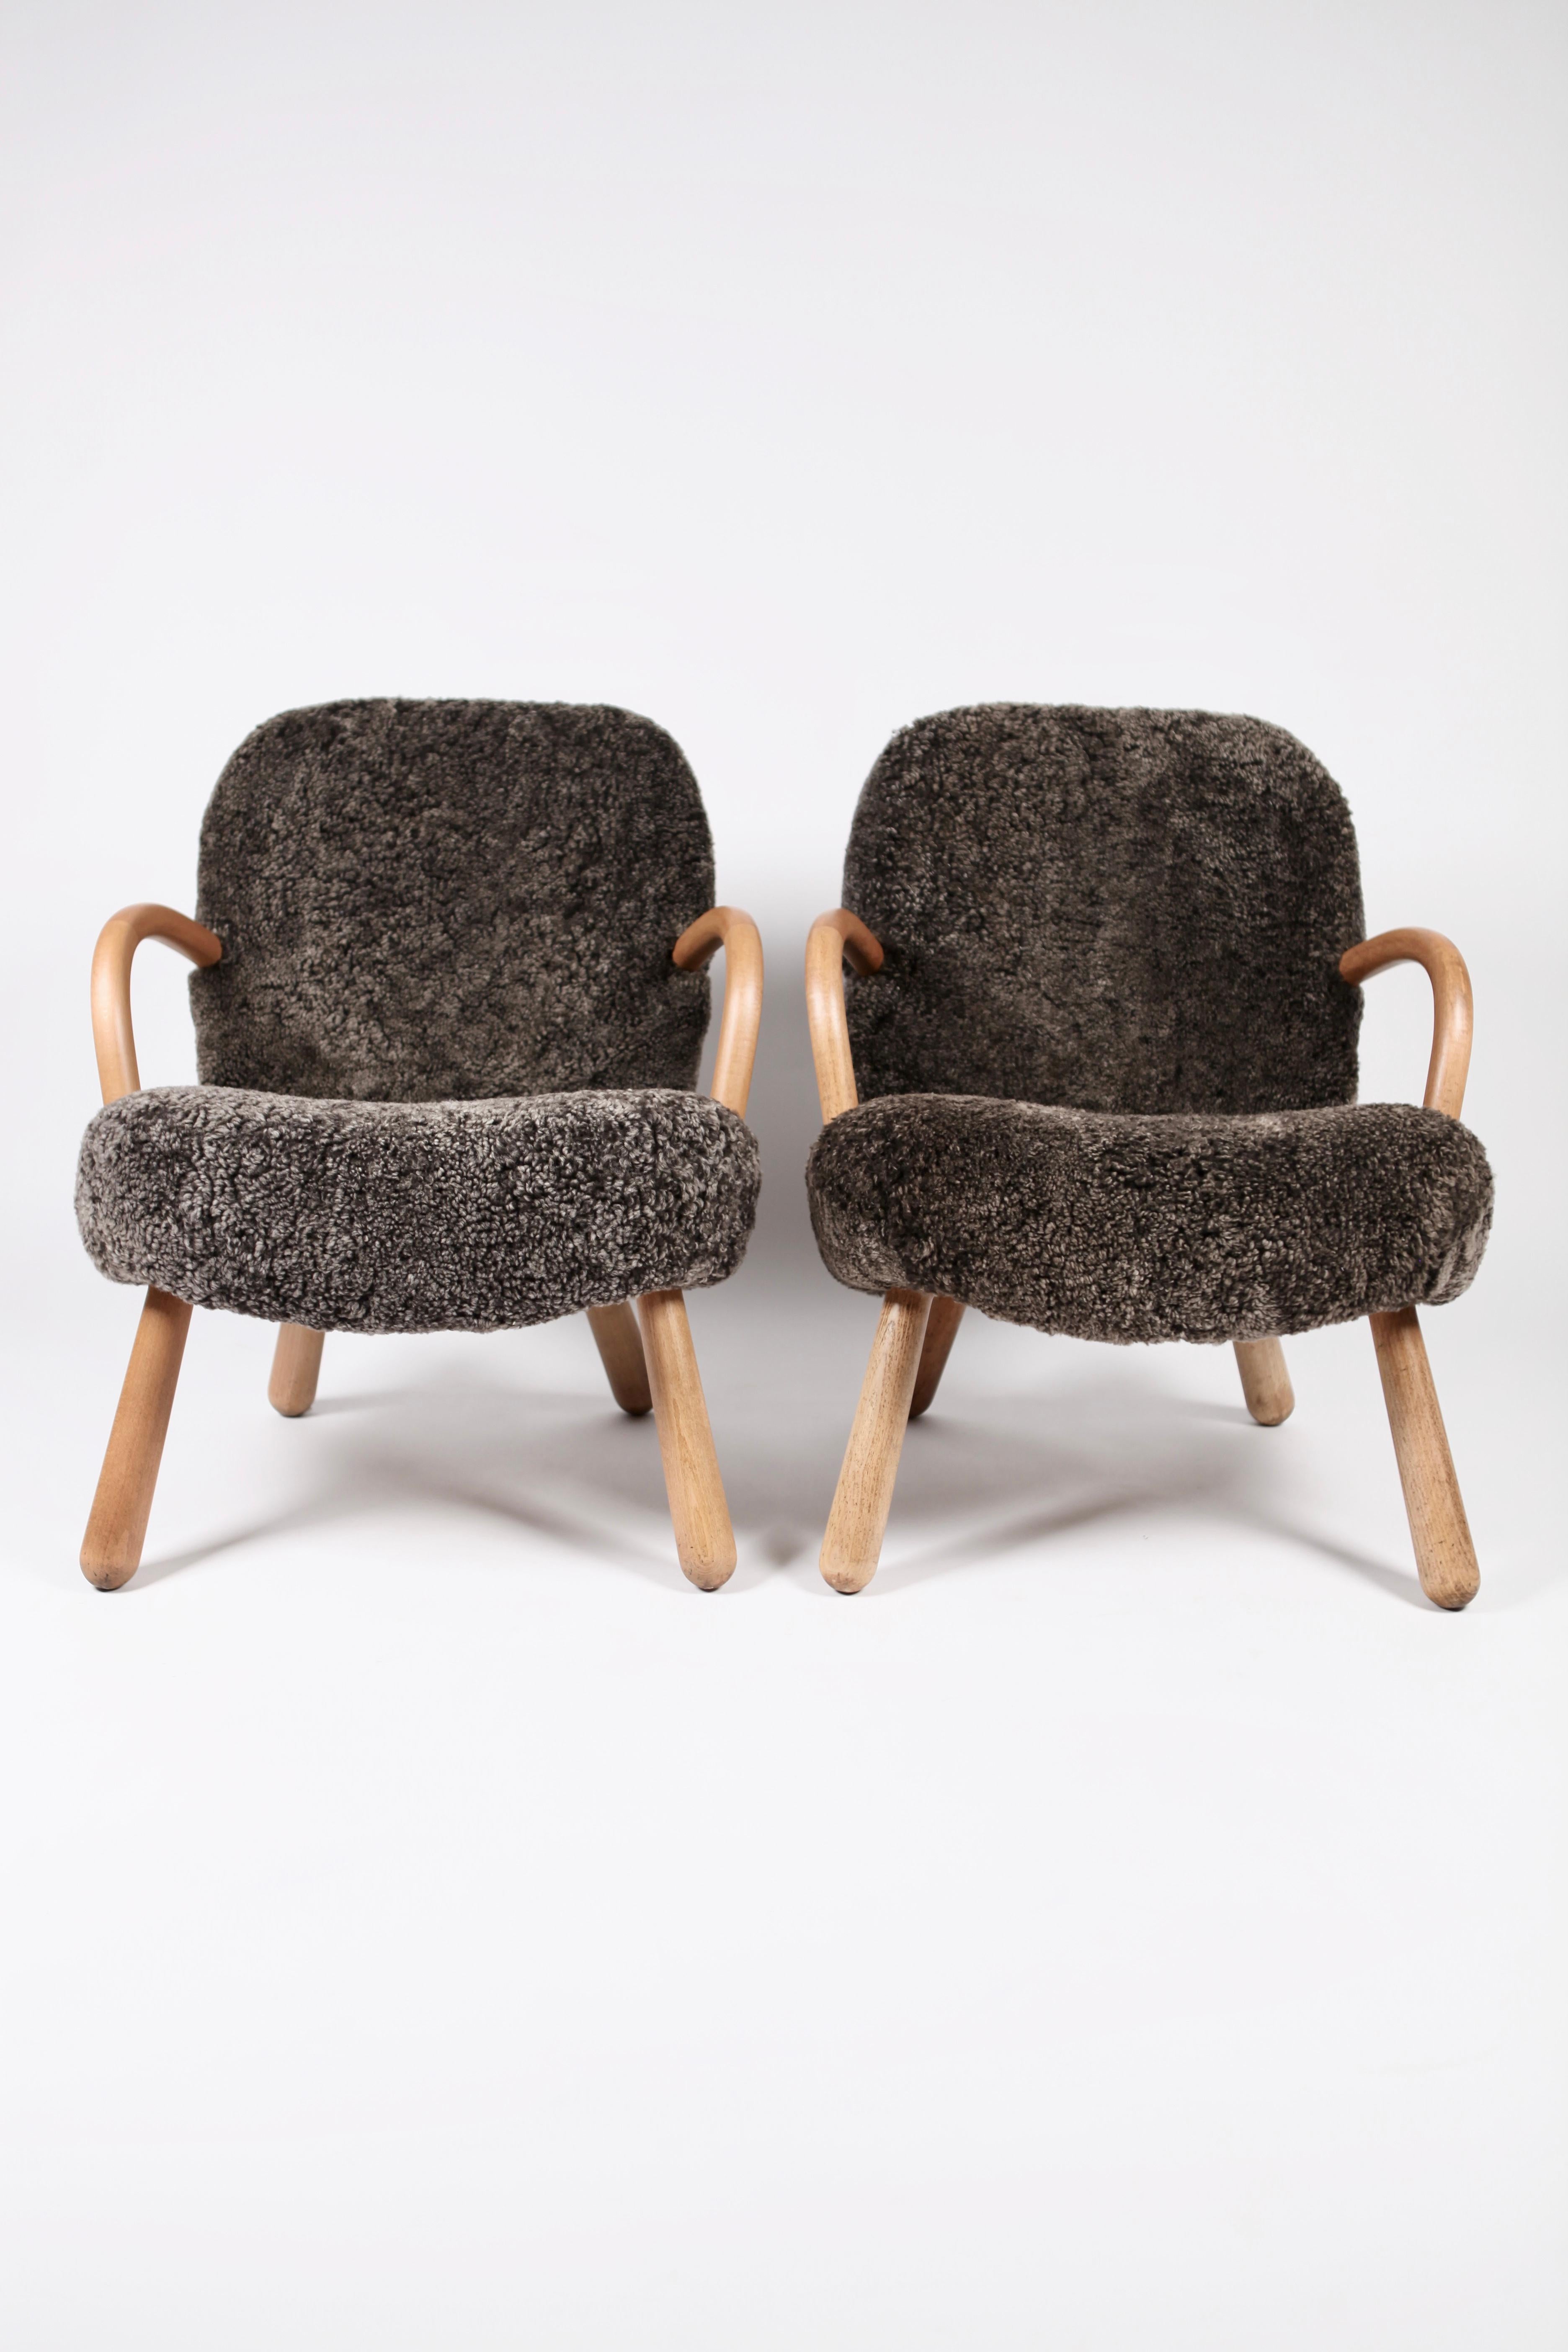 Swedish Pair of Philip Arctander Attributed Clam Chairs, 1950s